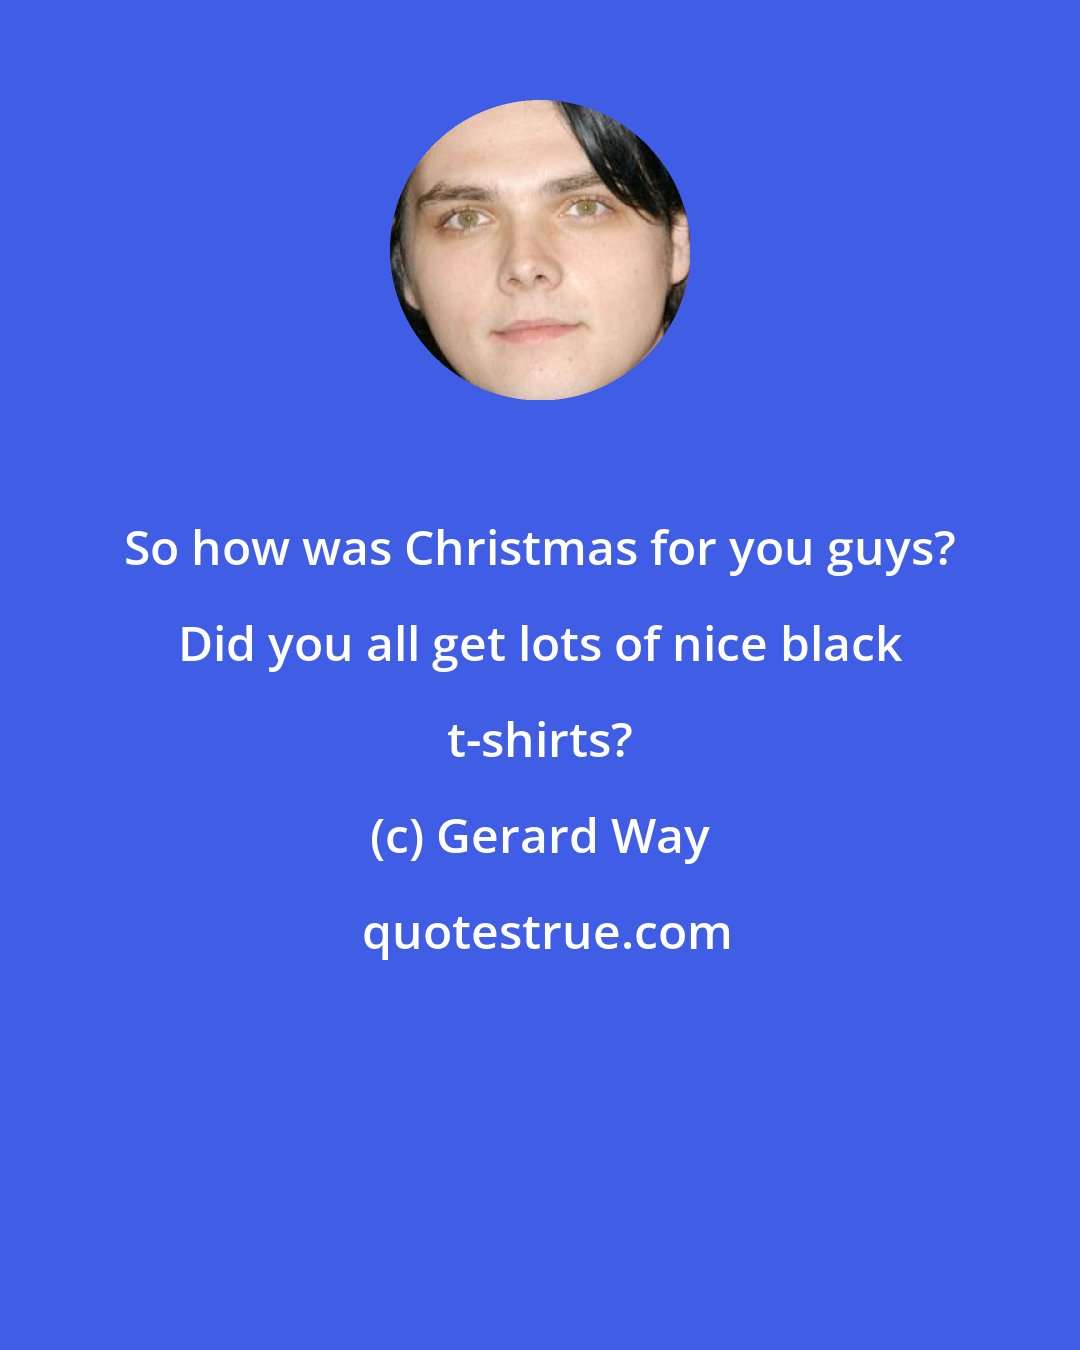 Gerard Way: So how was Christmas for you guys? Did you all get lots of nice black t-shirts?